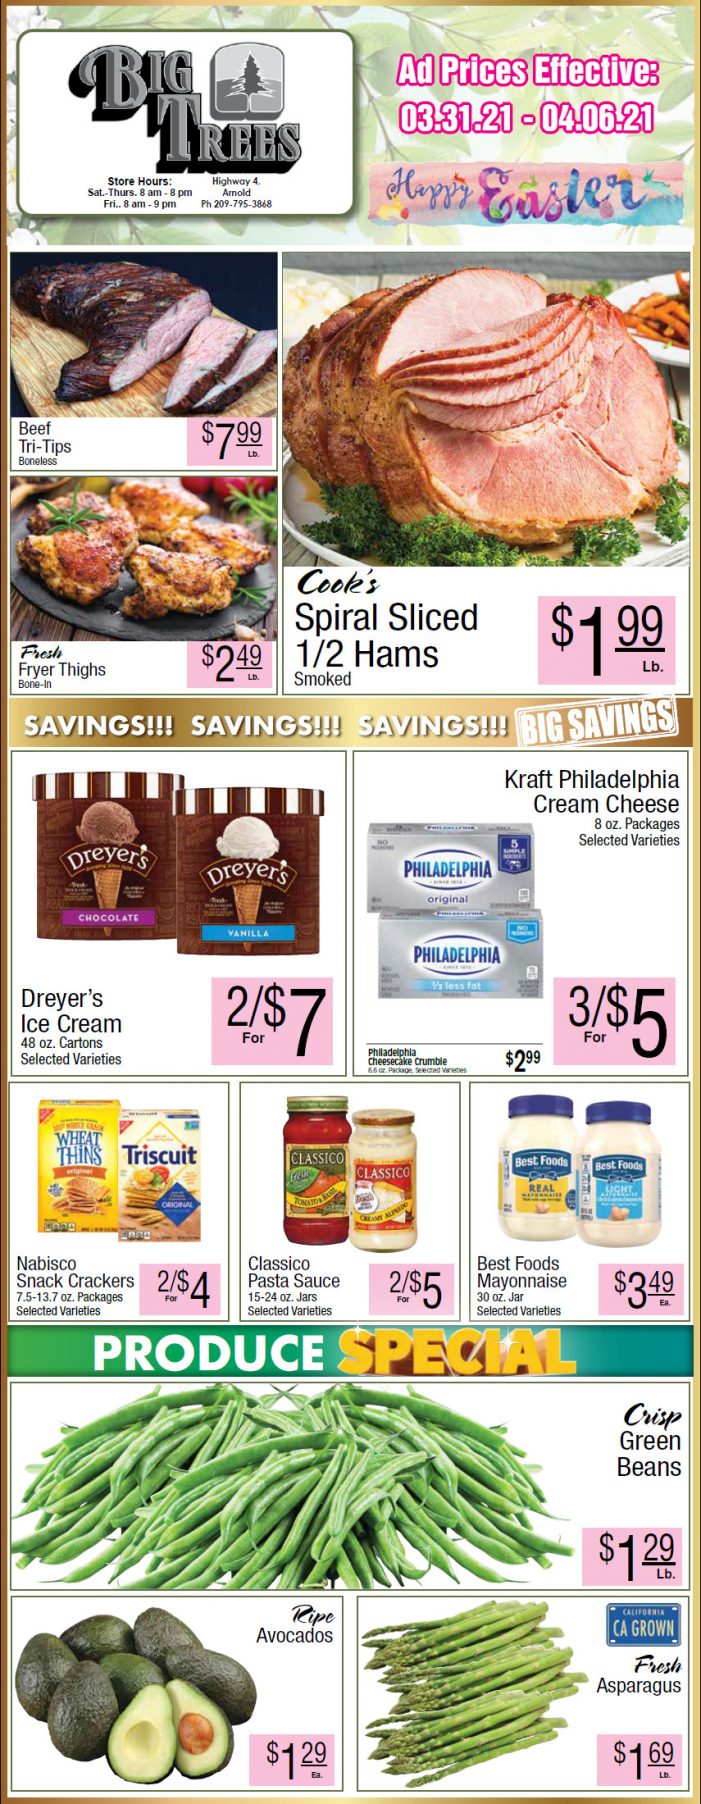 Big Trees Market Weekly Ad & Grocery Specials Through April 6th!  Shop Local & Happy Easter!!